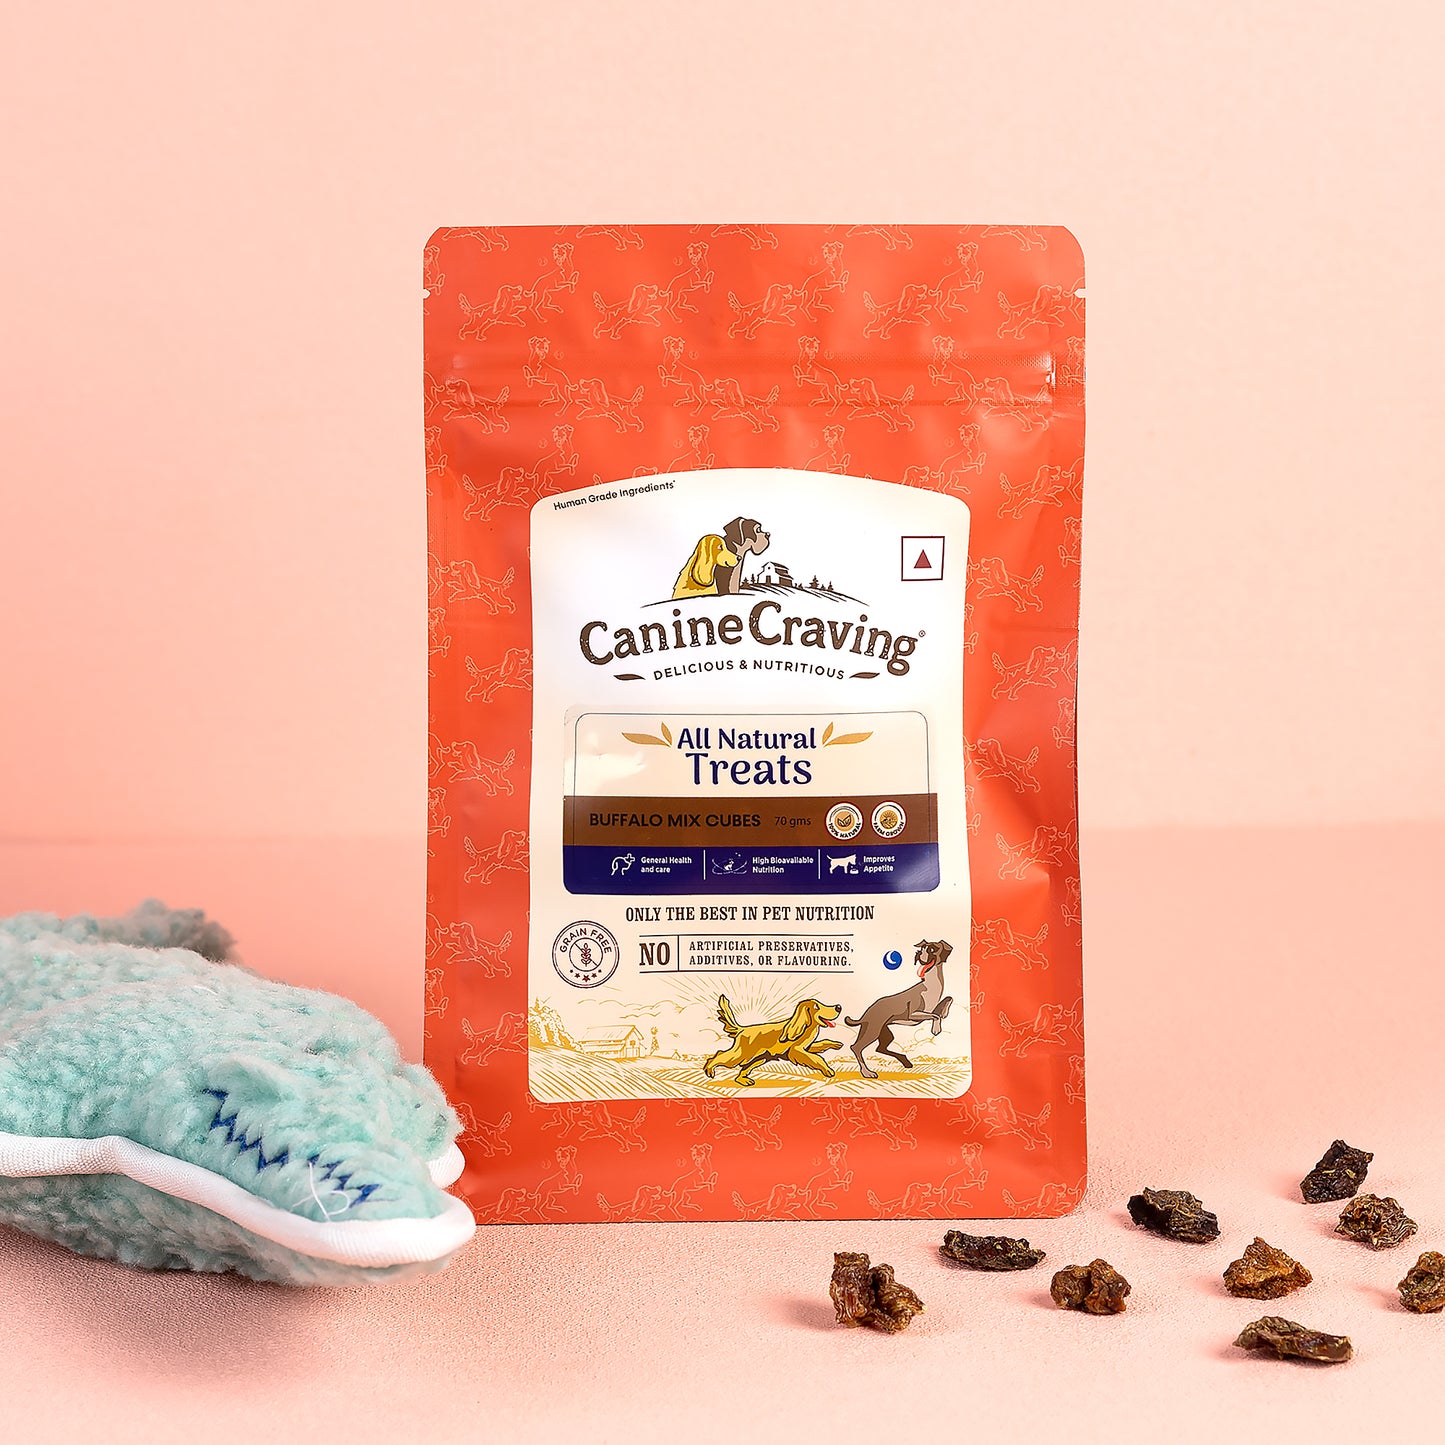 Canine Craving Dehydrated Buffalo Mix Cubes - 70g